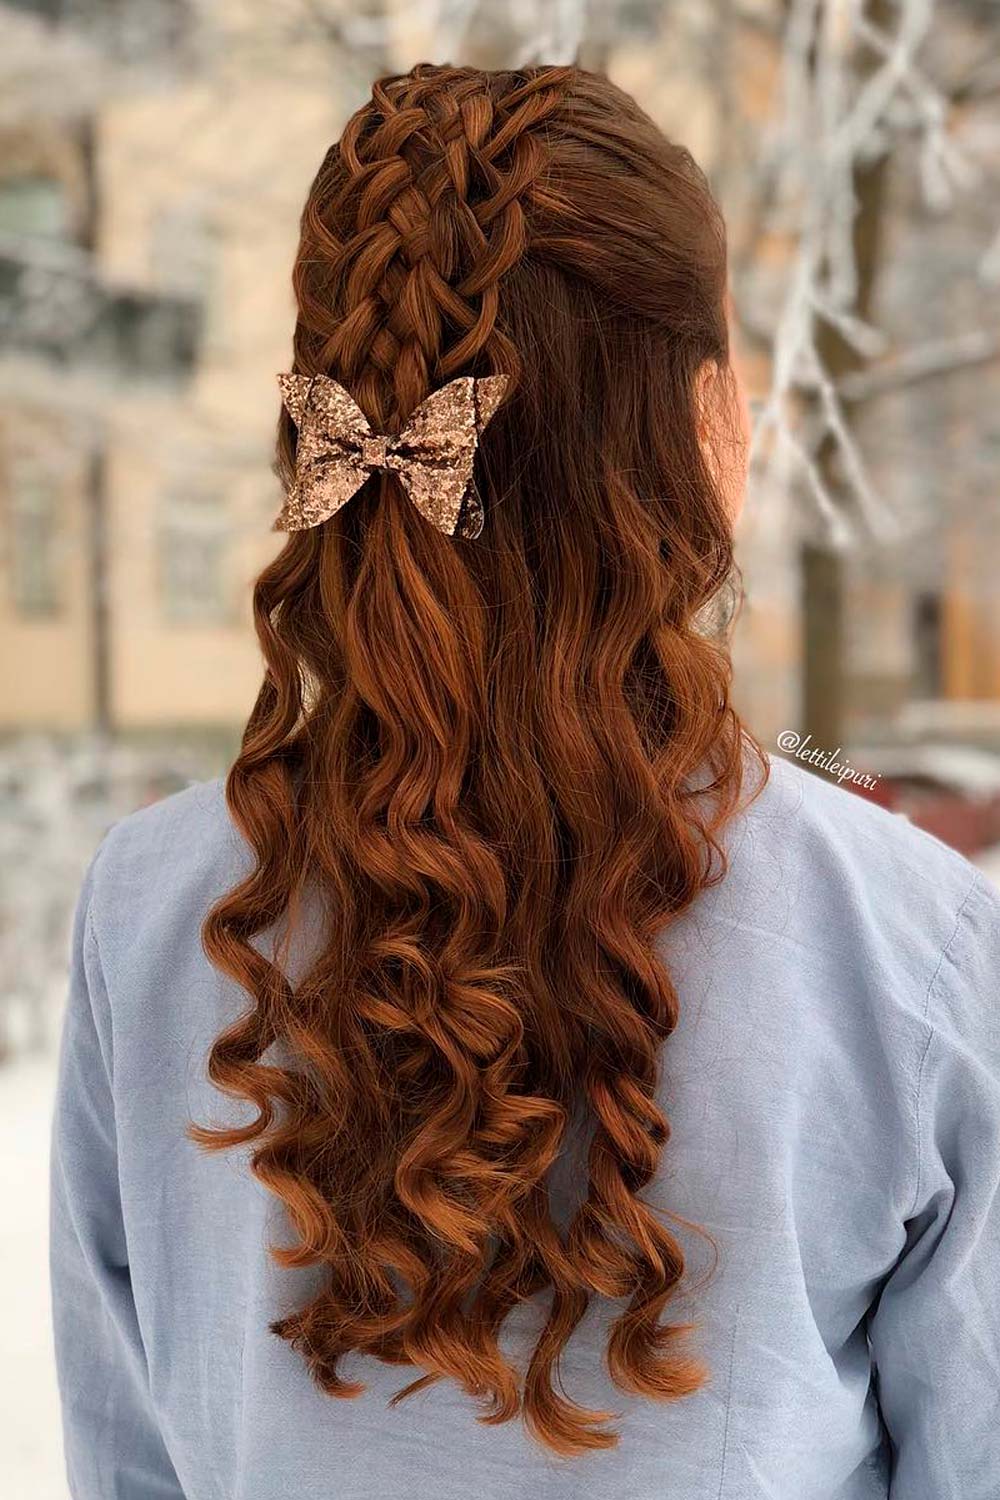 It is a good idea to complete your cute hairstyles for Christmas with glitter bows of all sizes and colors